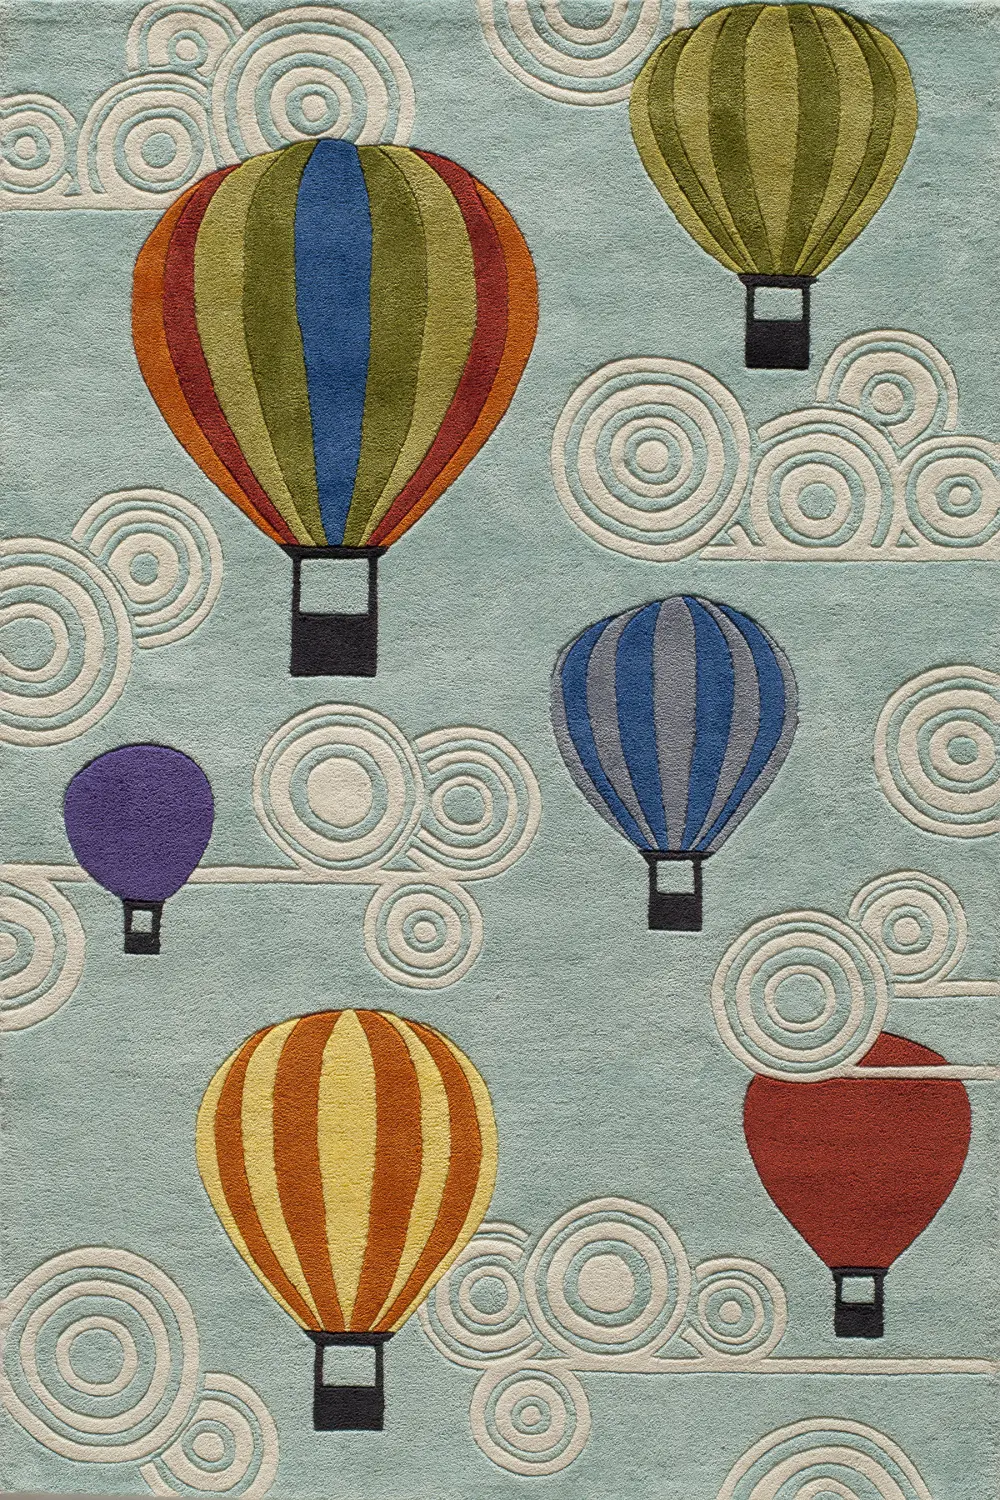 4 x 6 Small Hot Air Balloons Blue Rug - Whimsy-1